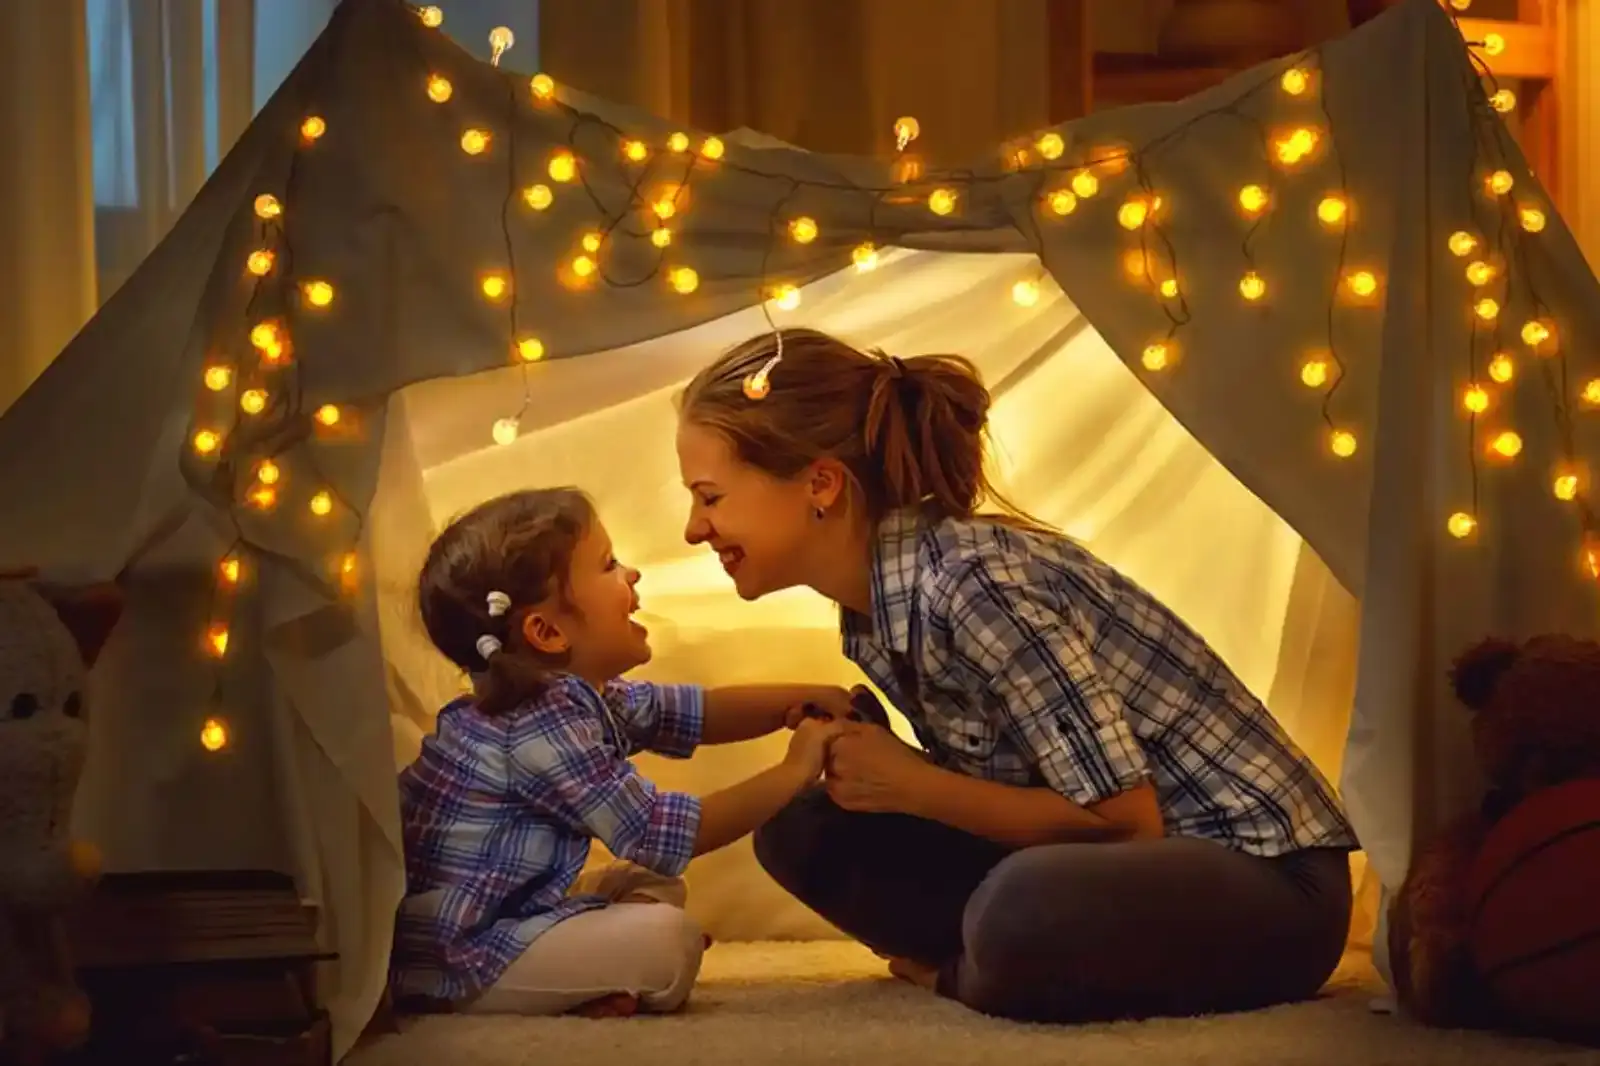 How to Take Christmas_Fairy Light Pictures Indoors